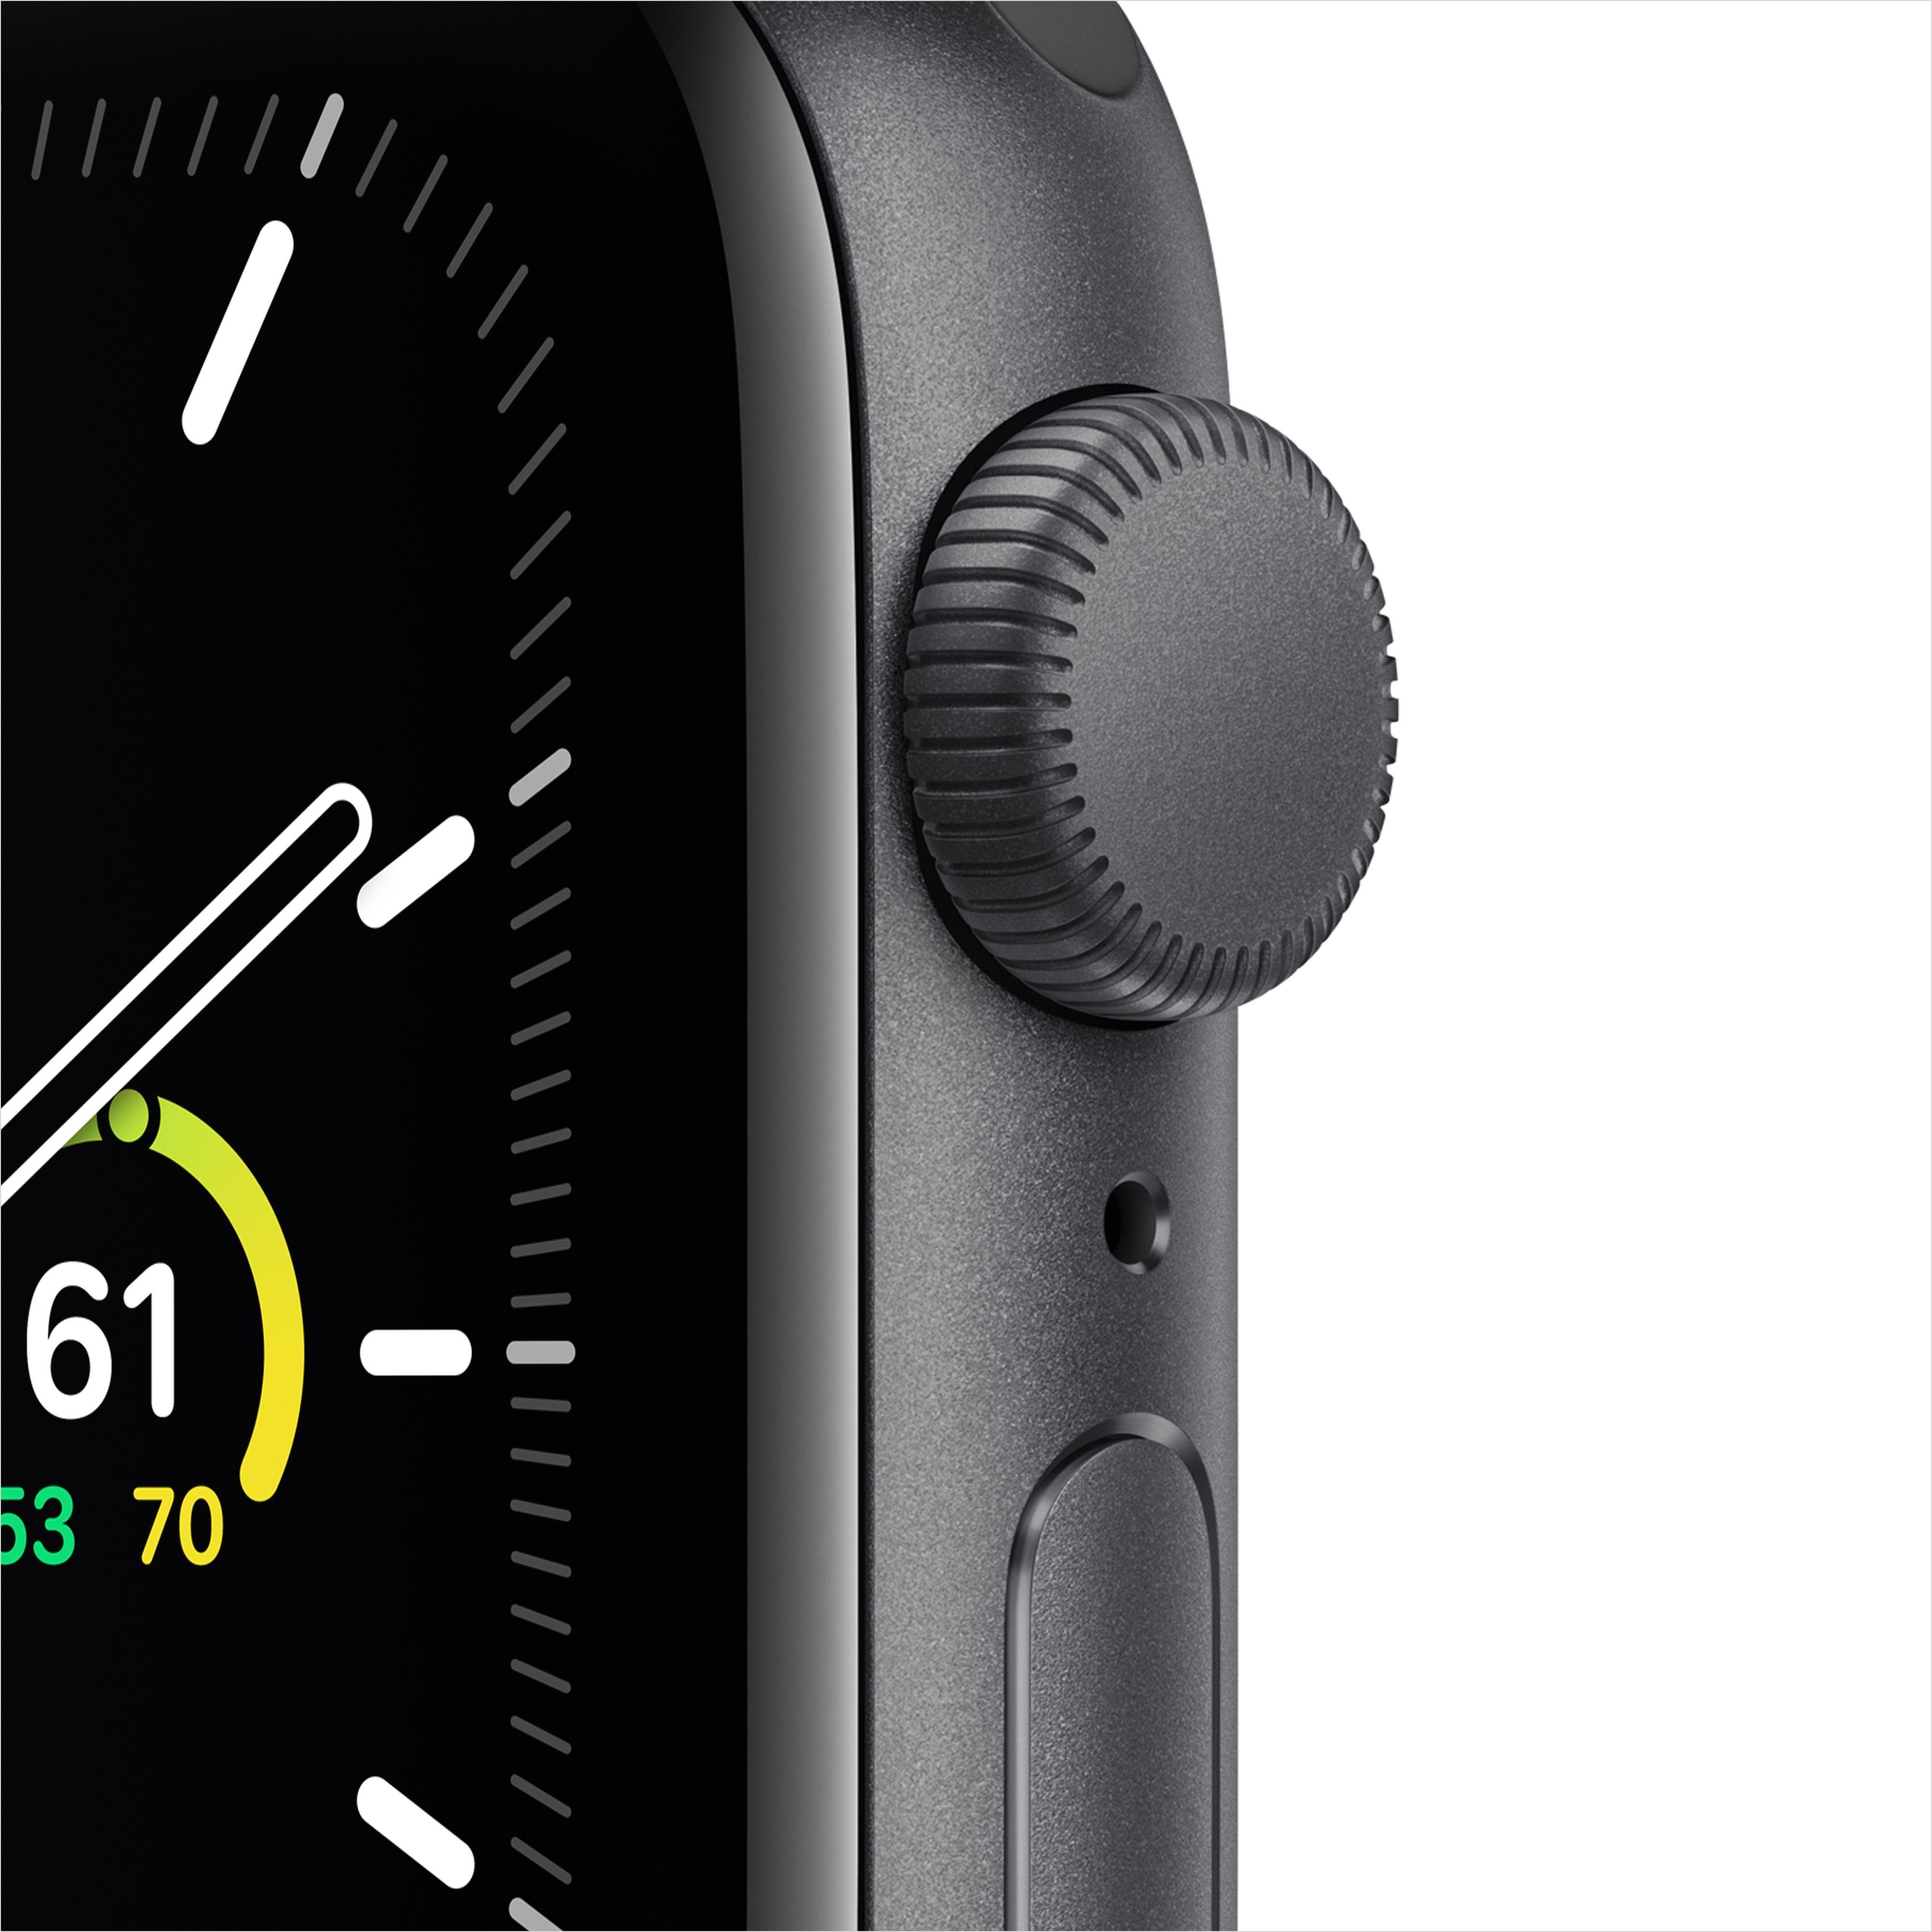 Apple Watch SE (1st Gen) GPS, 40mm Space Gray Aluminum Case with Black Sport Band - Regular - image 3 of 9